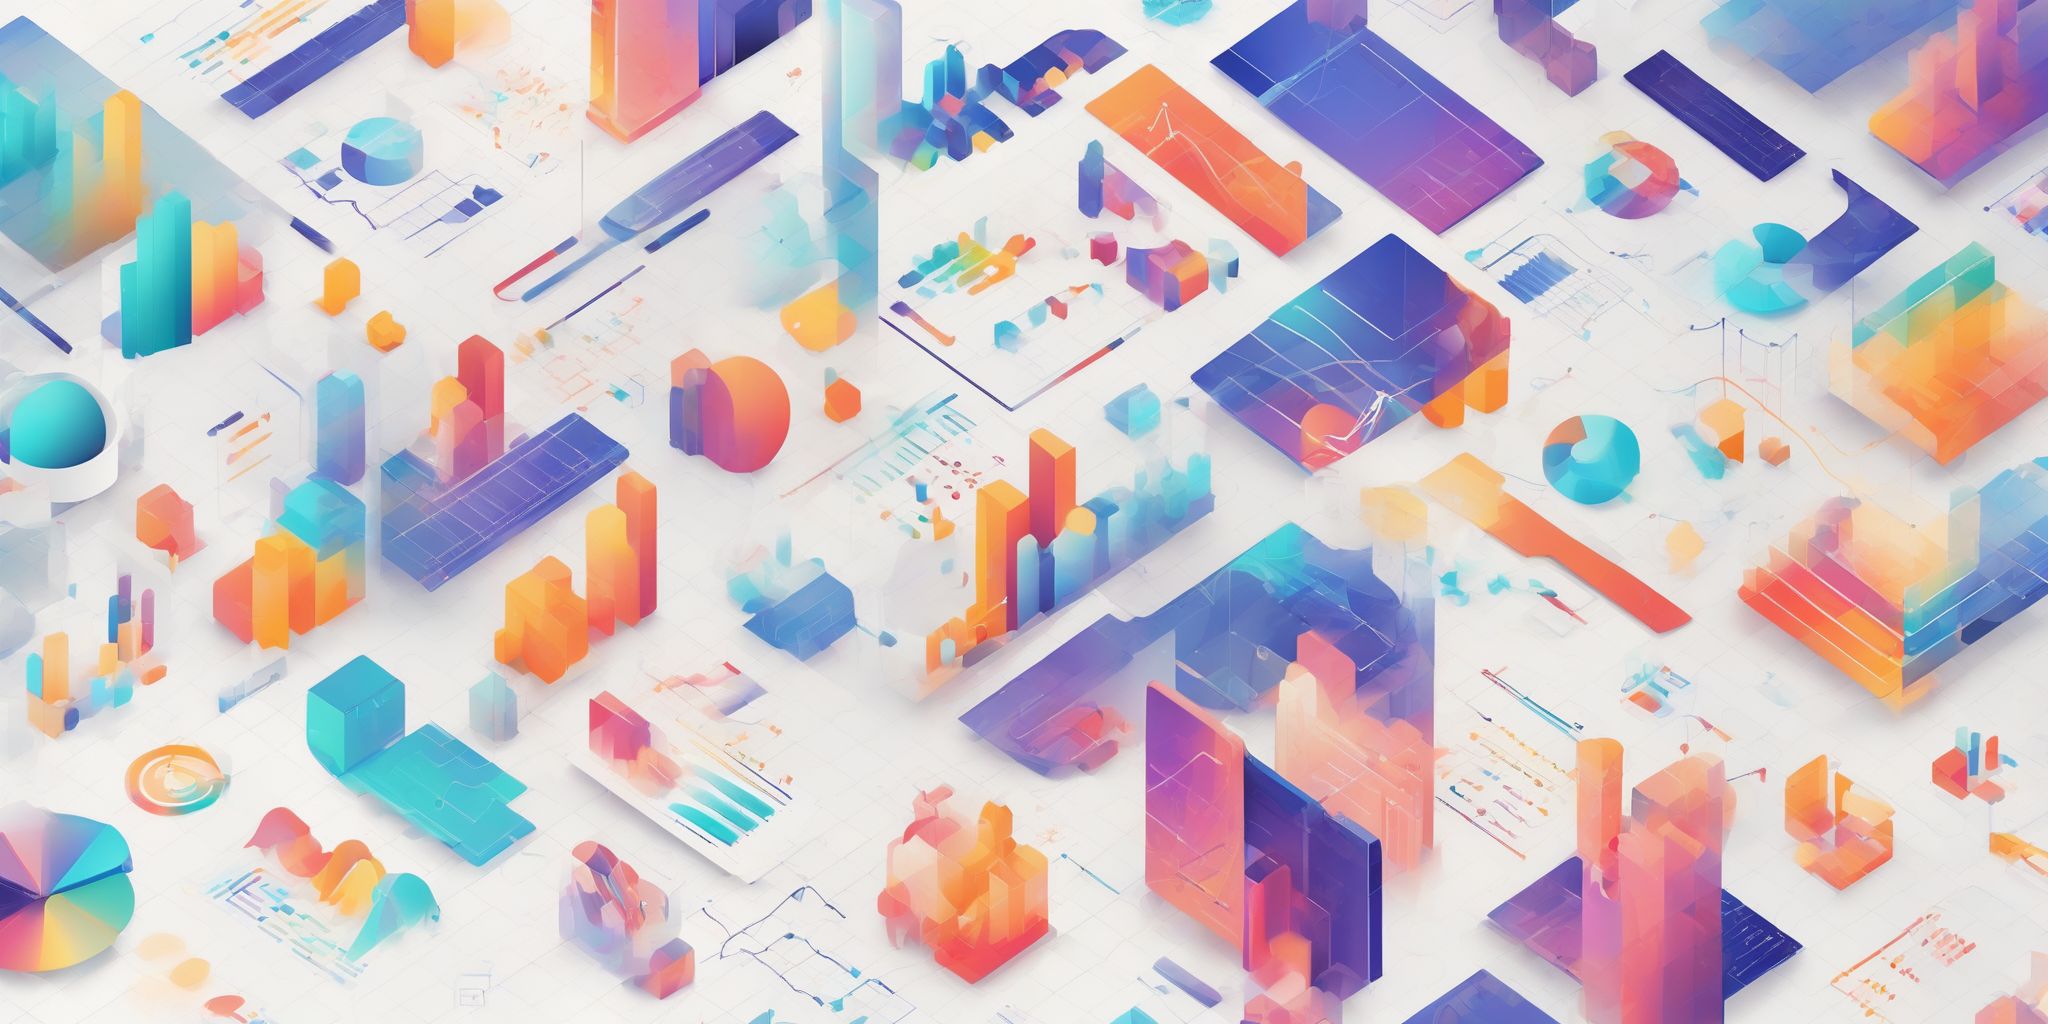 data in illustration style with gradients and white background